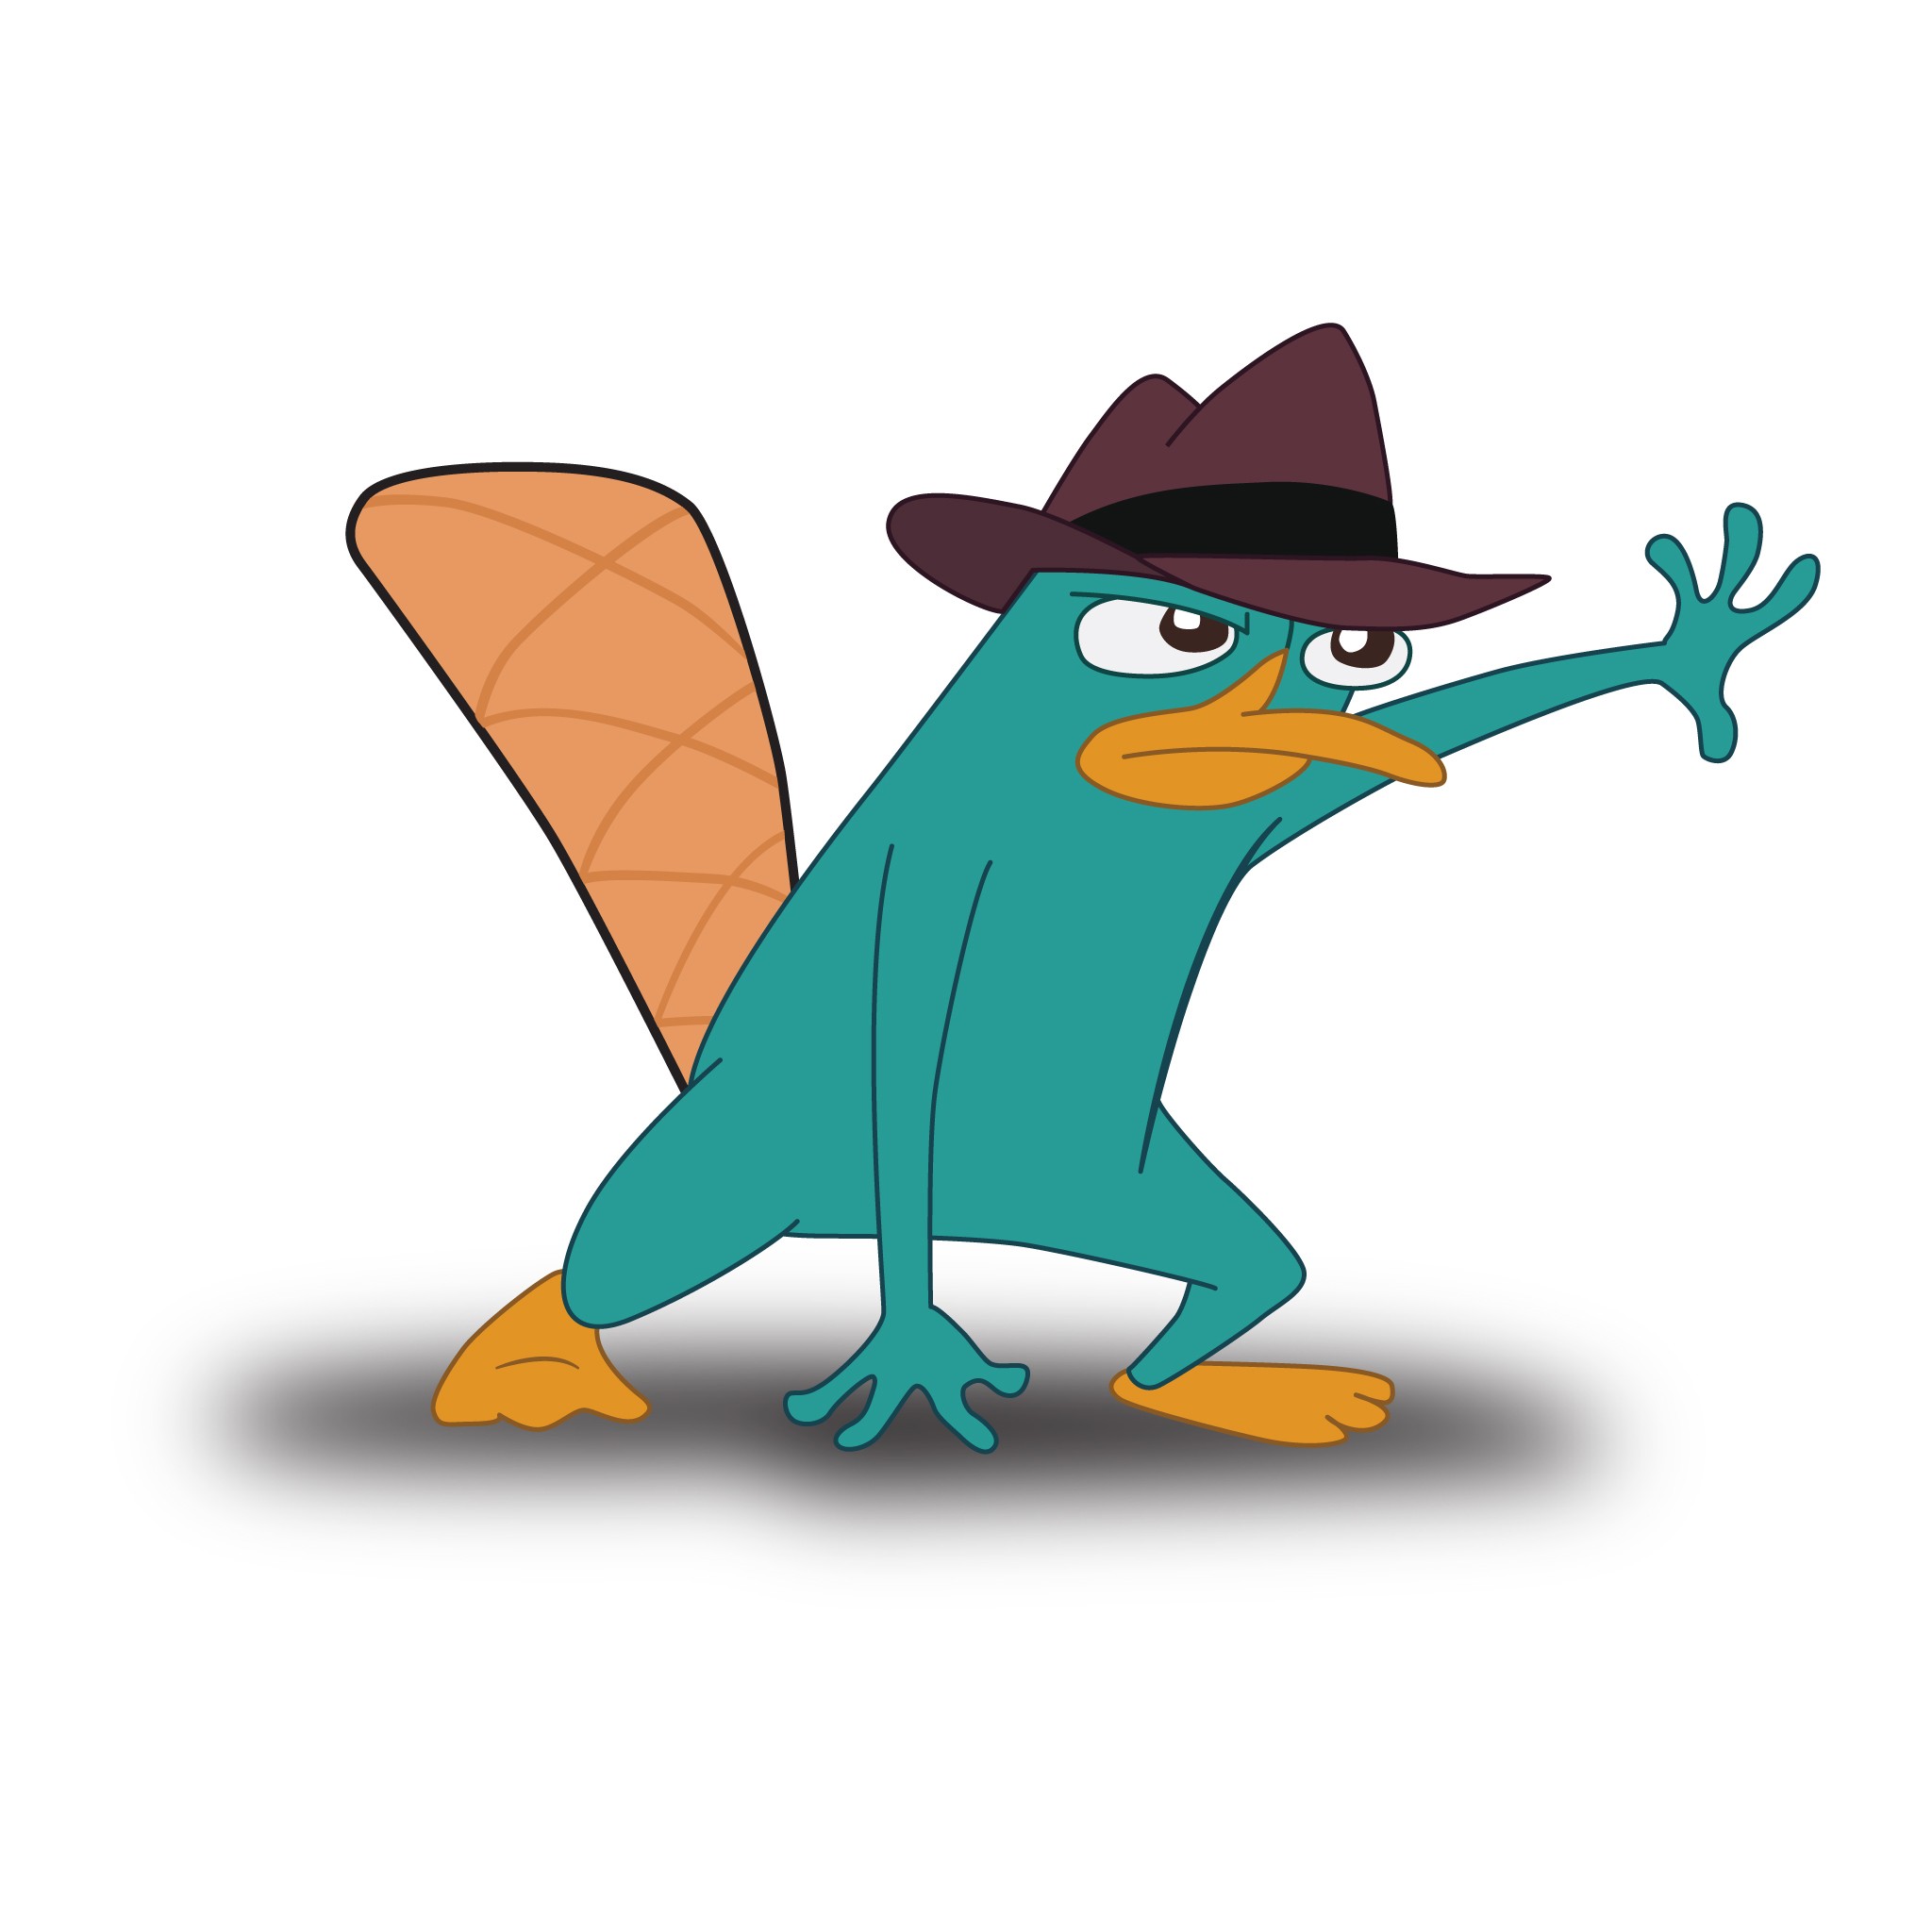 Perry The Platypus Schnabeltier HD Wallpaper Of General Walls